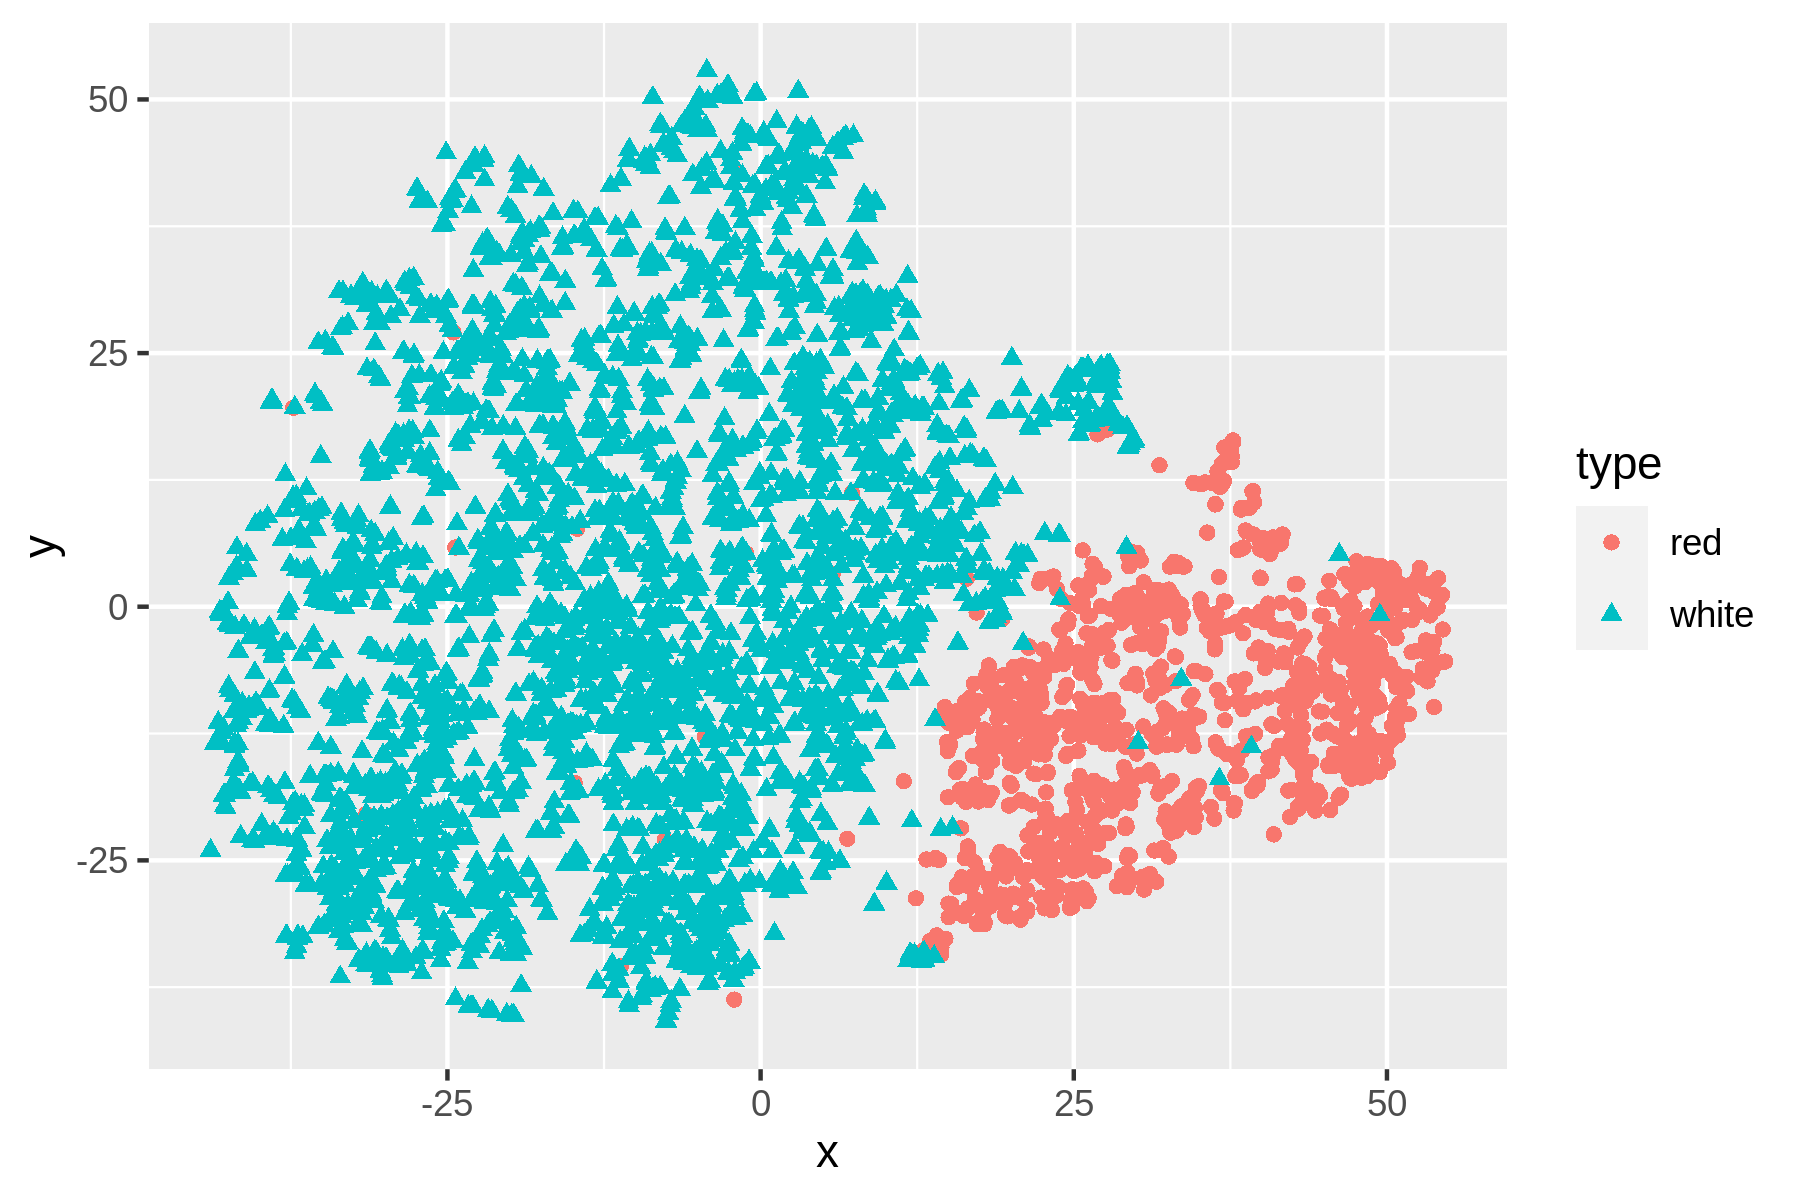 Non-linear dimensionality reduction with t-SNE